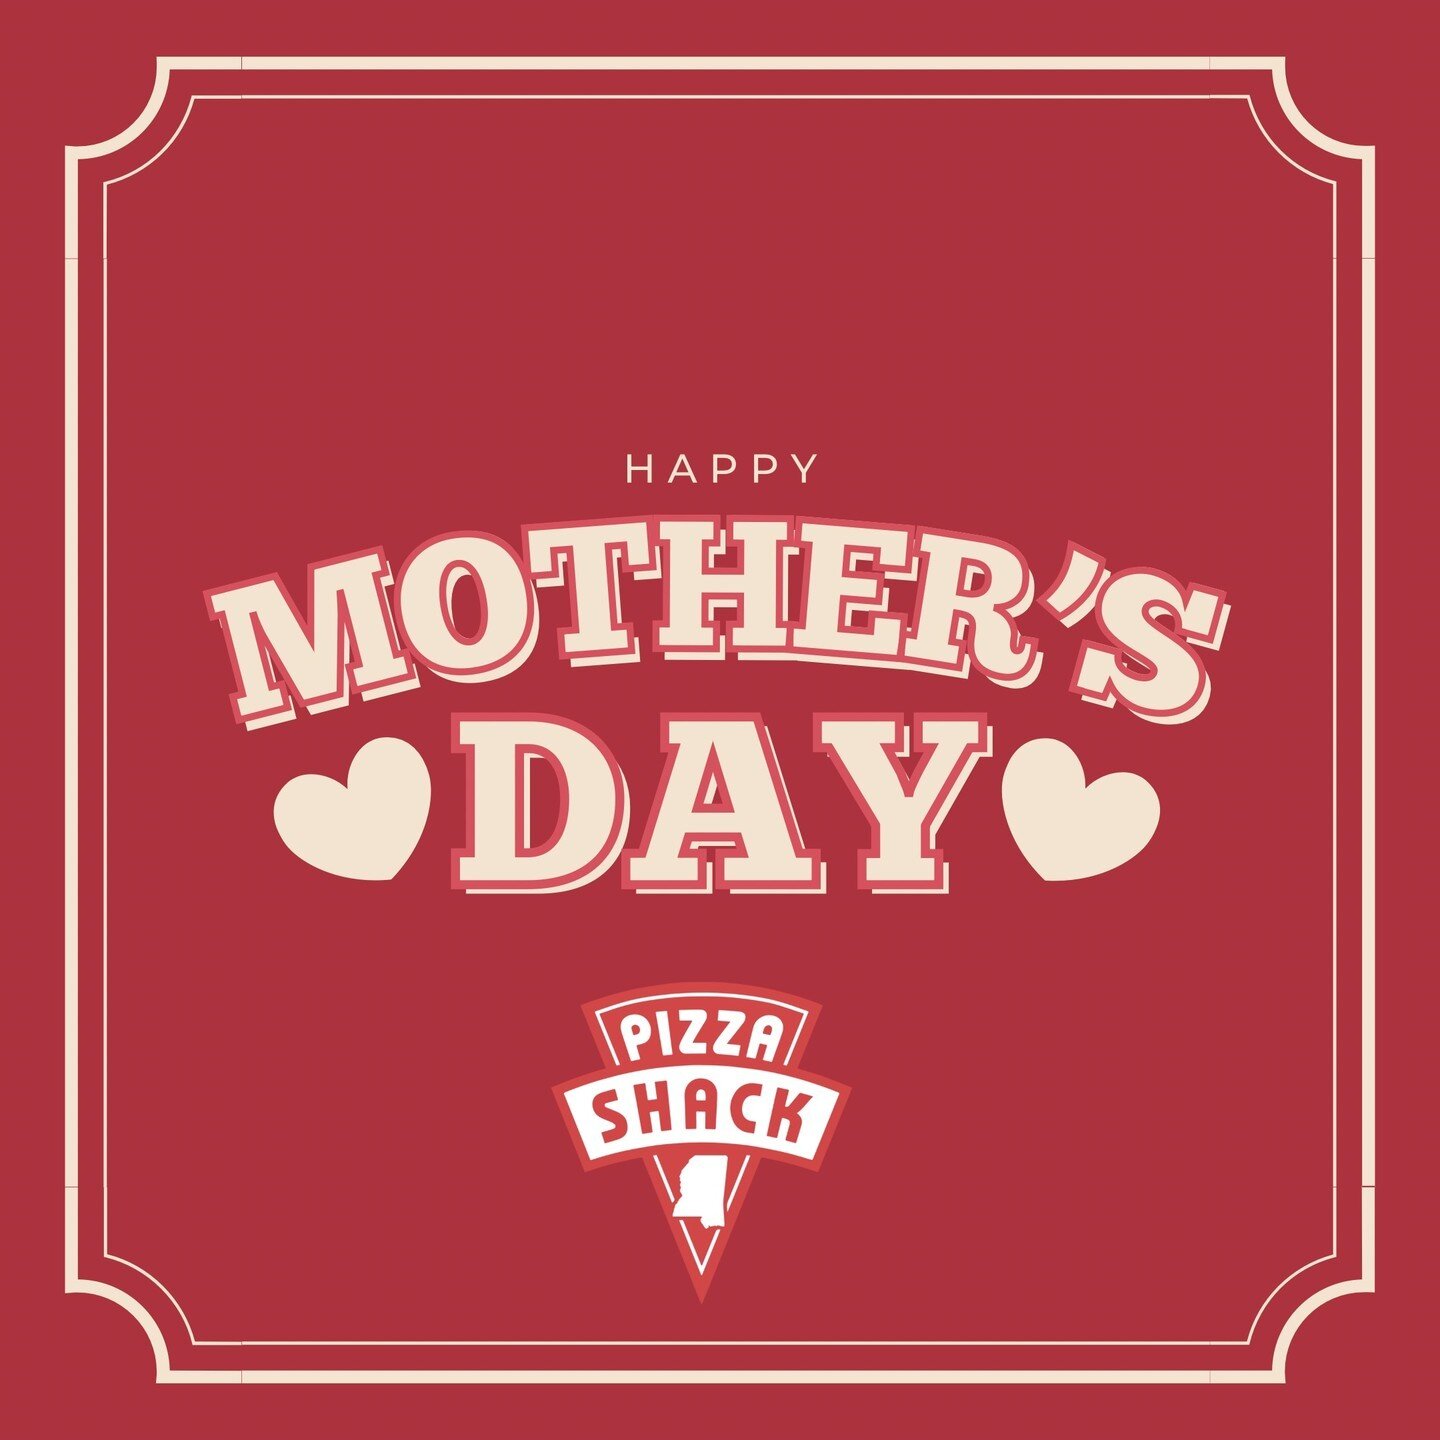 Happy Mother's Day to all the amazing moms out there! You deserve to be celebrated today and every day.

 Come celebrate the mom in your life with us, as we are open from 11AM until 9PM. Treat her to a delicious pizza and show her how much you love a